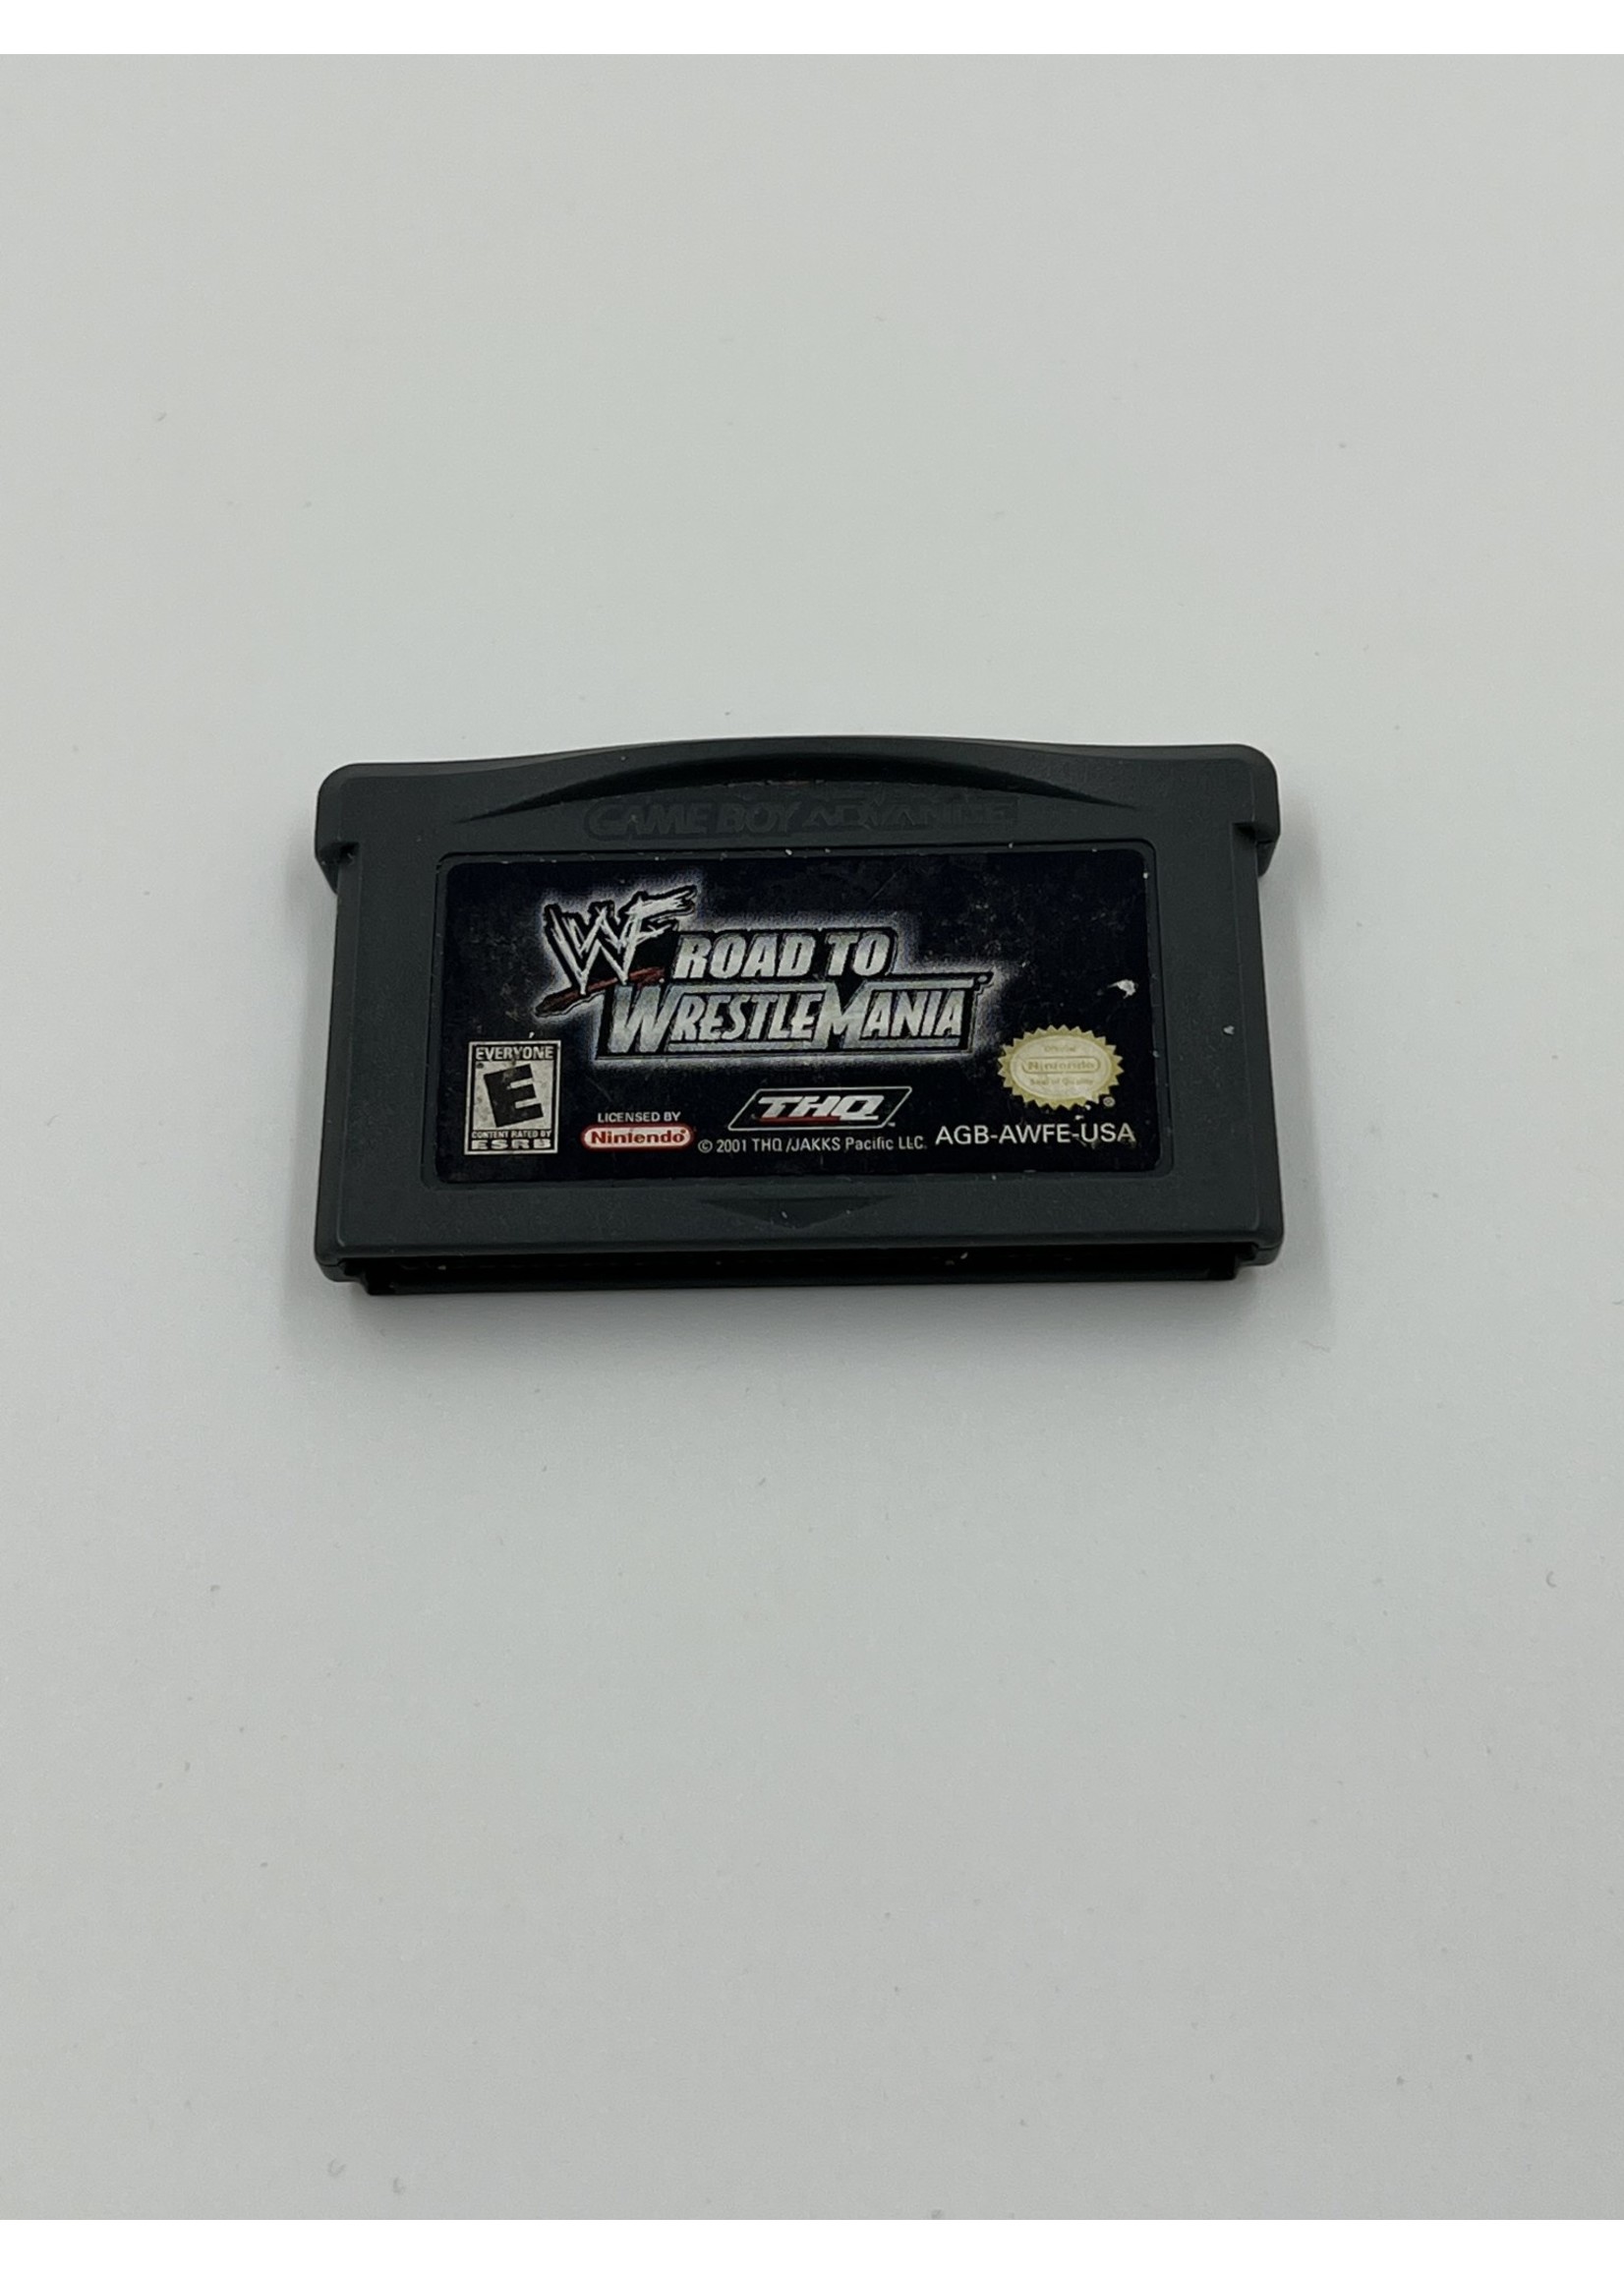 GameBoy Advance Wwf Road To Wrestlemania Gba